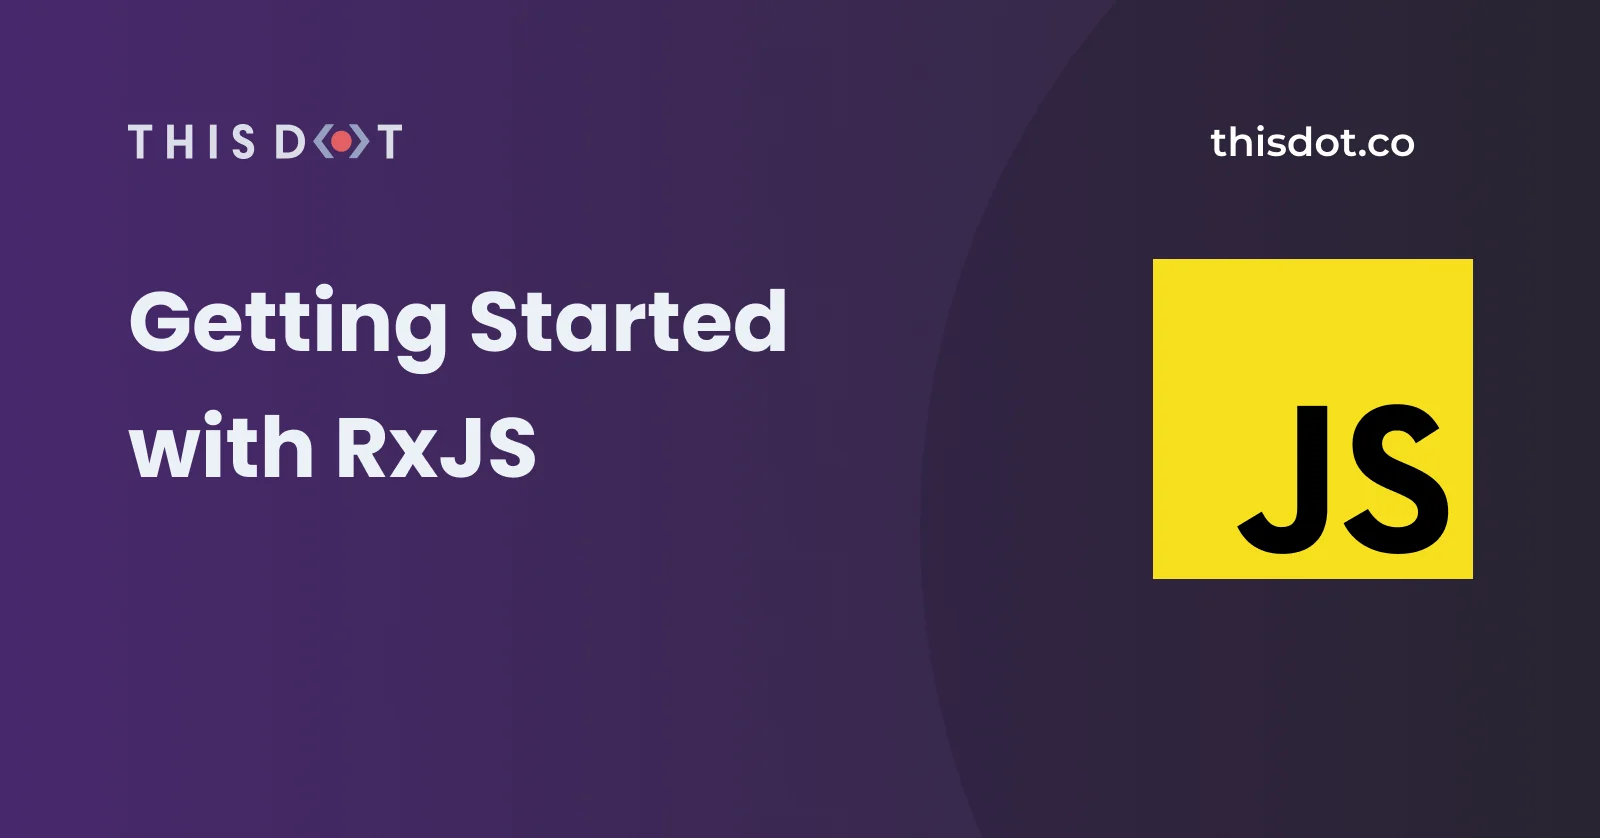 Getting Started with RxJS